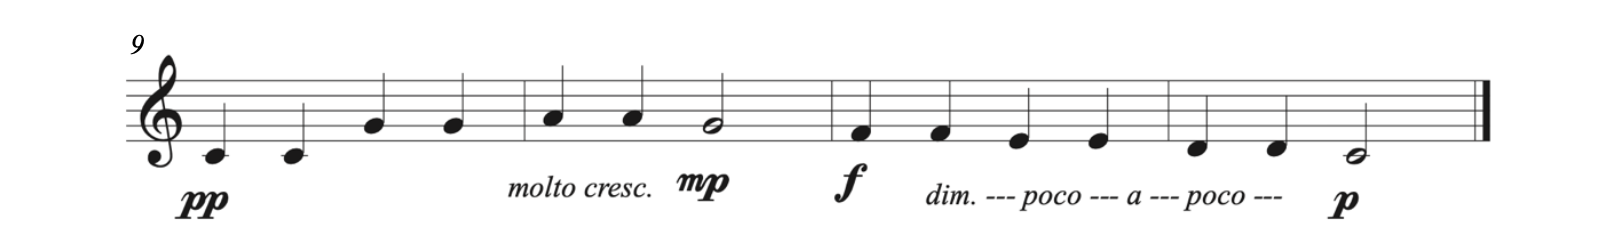 Twinkle Twinkle Little Star begins at measure 9. It begins pianissimo. The score shows molto crescendo, which means to get much louder at the start of measure 10. By the end of measure 10, the music is mezzopiano. Measure 11 begins forte and the score is marked diminuendo poco a poco which means get softer little by little until the second half of measure 12, where the last note is marked piano.